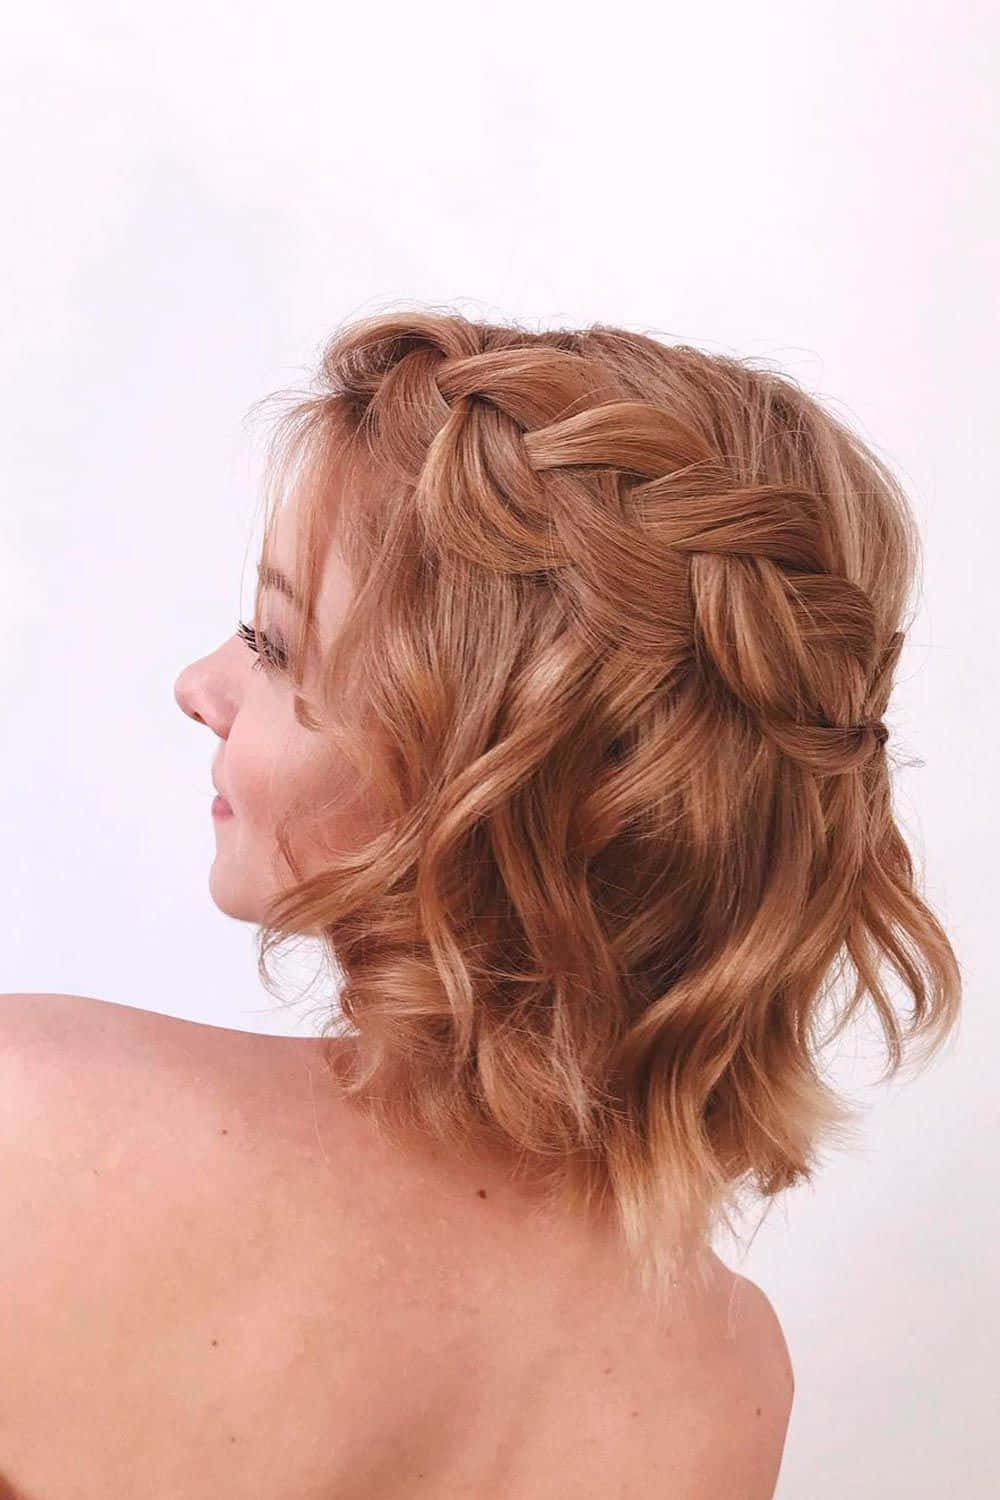 Stay Stylish with These Cute Hairstyles